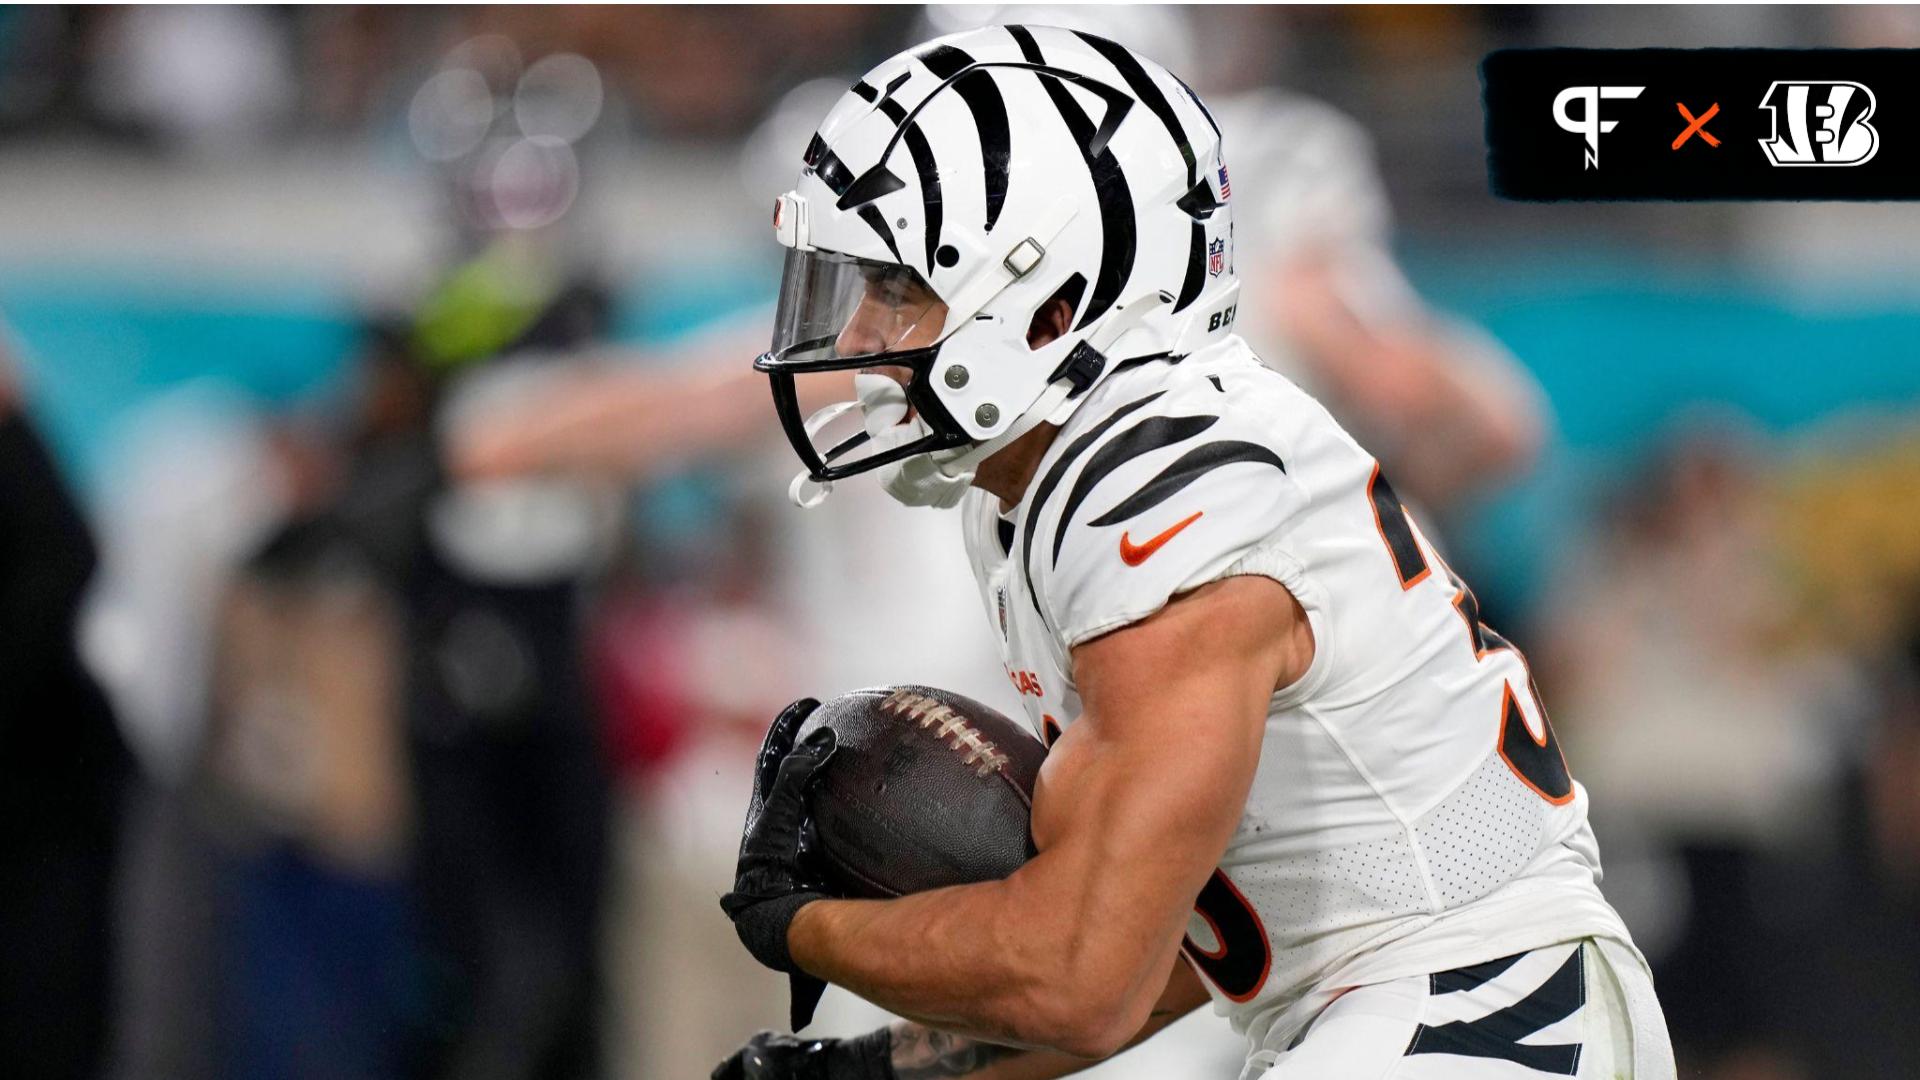 Chase Brown (30) takes a carry from Cincinnati Bengals quarterback Jake Browning (6) in the first half of a Week 13 NFL football game against the Jacksonville Jaguars.